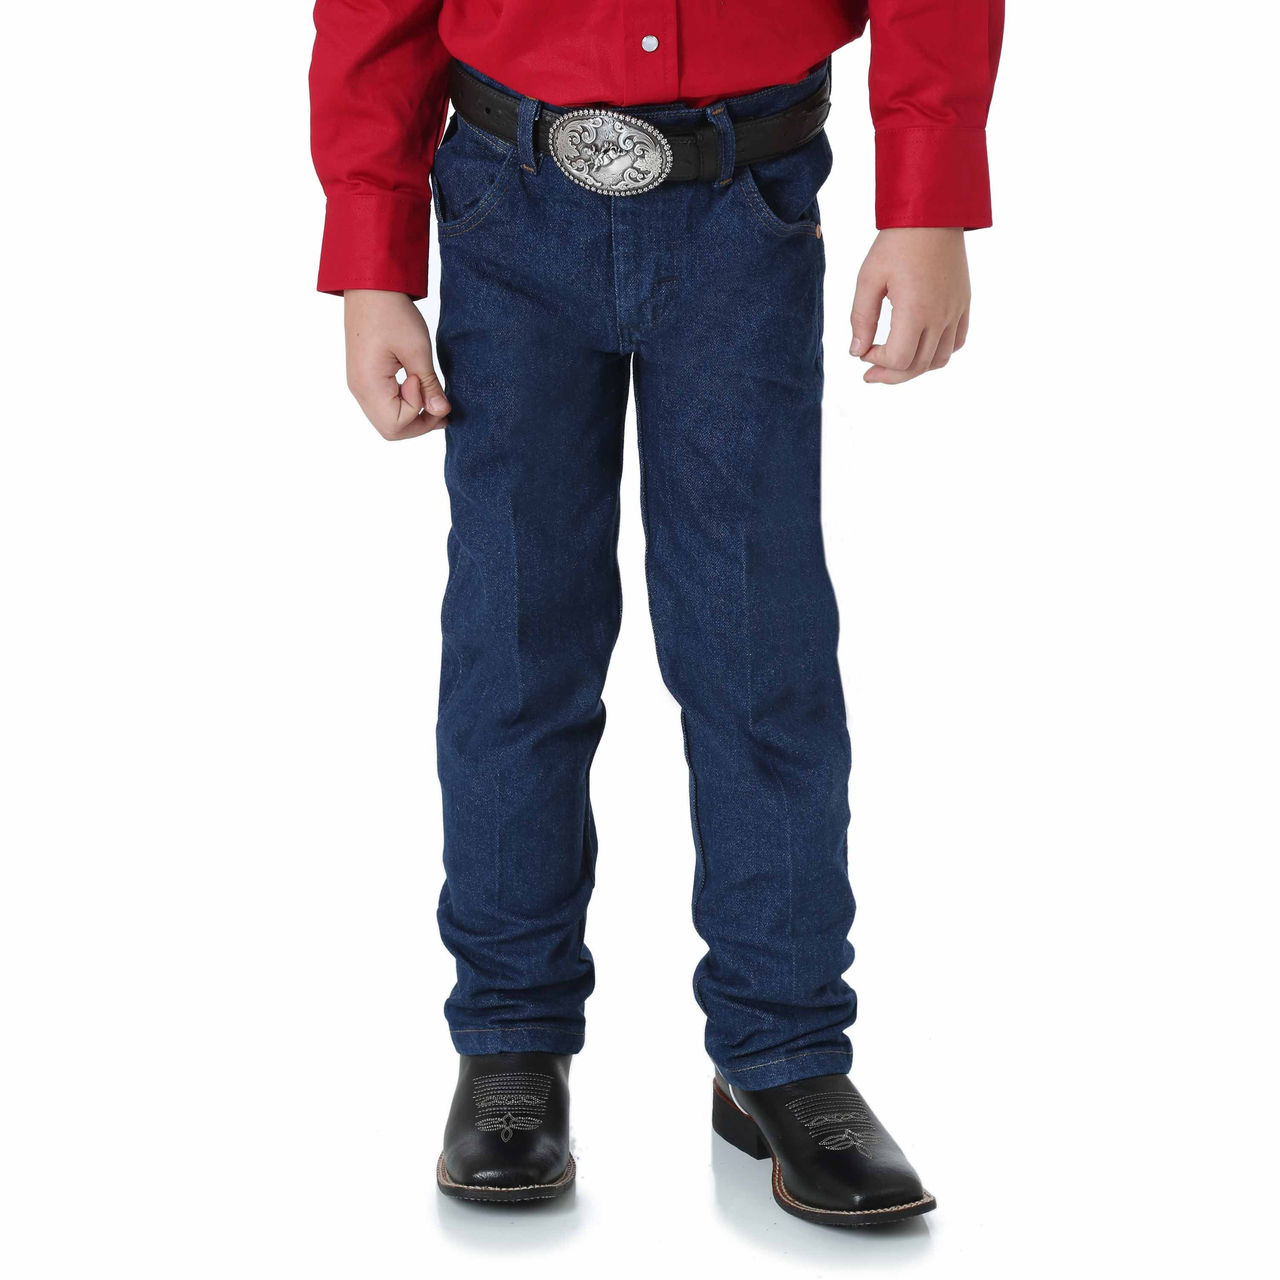 image of kids' clothes links to all kids clothing catalog.